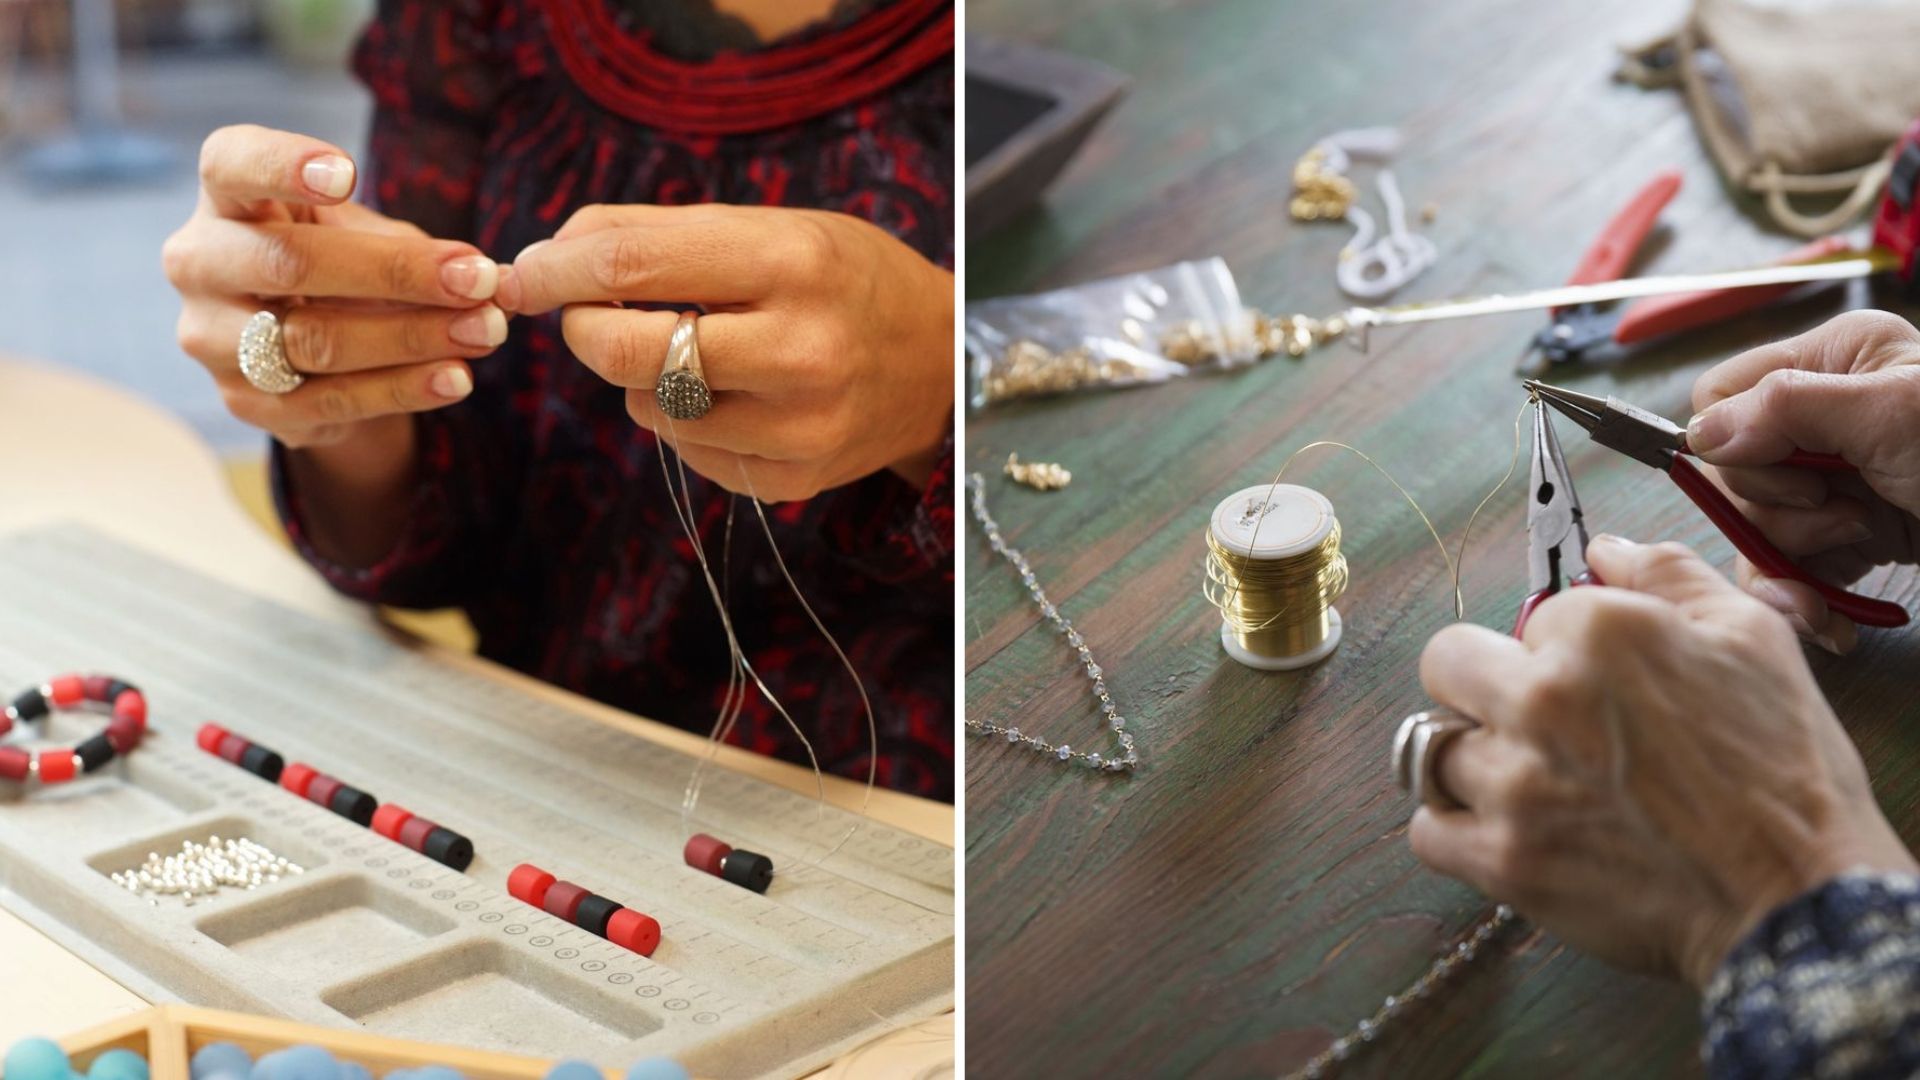 Two women making pieces of jewelry using different materials.